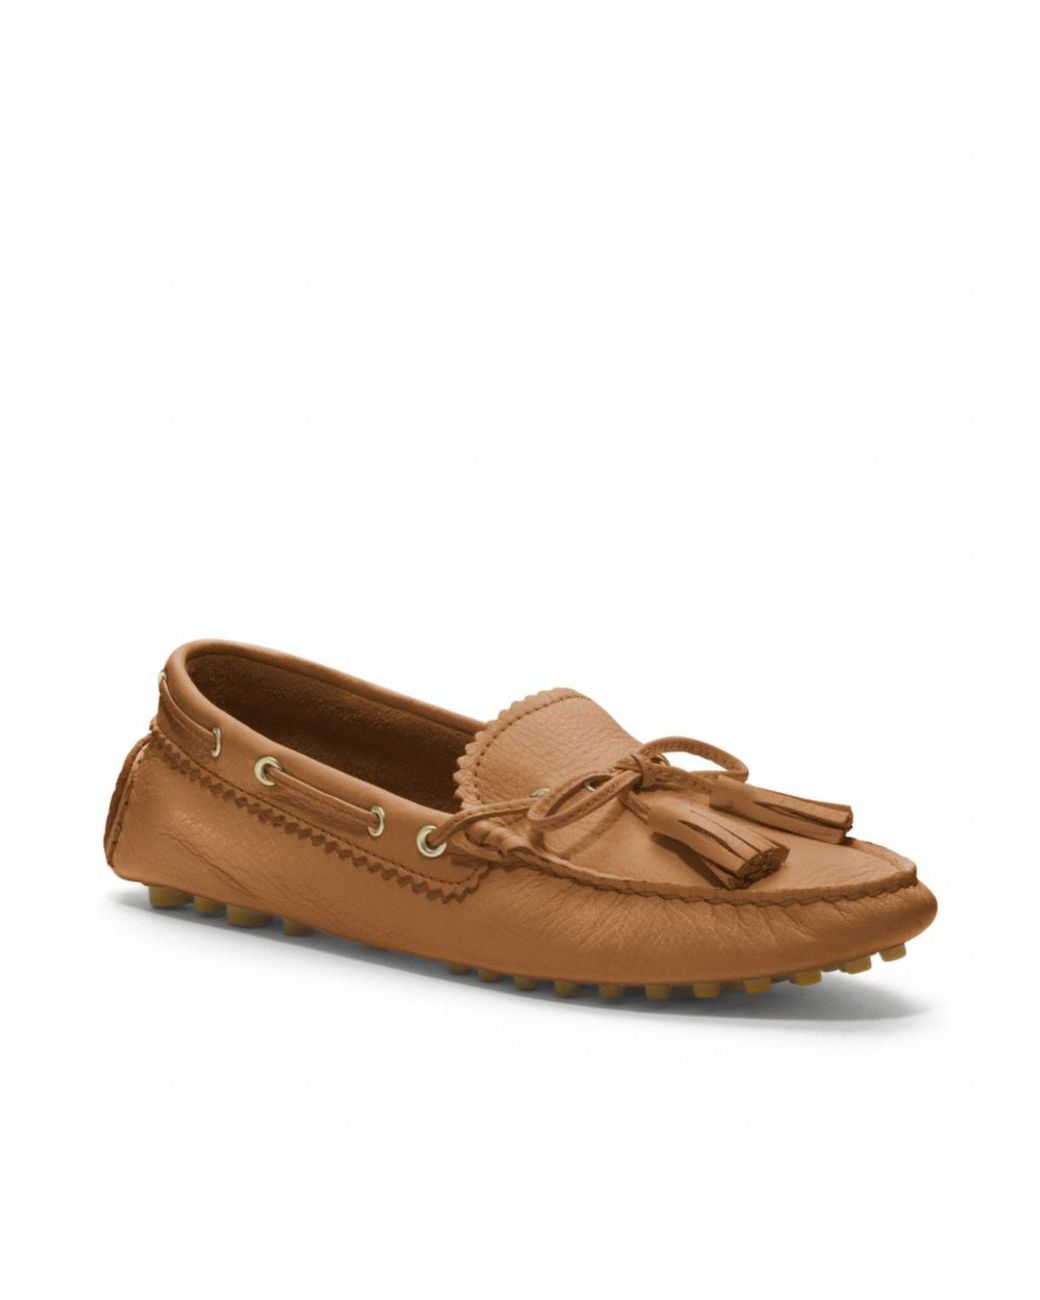 COACH Women's Brown Nadia Moccasin